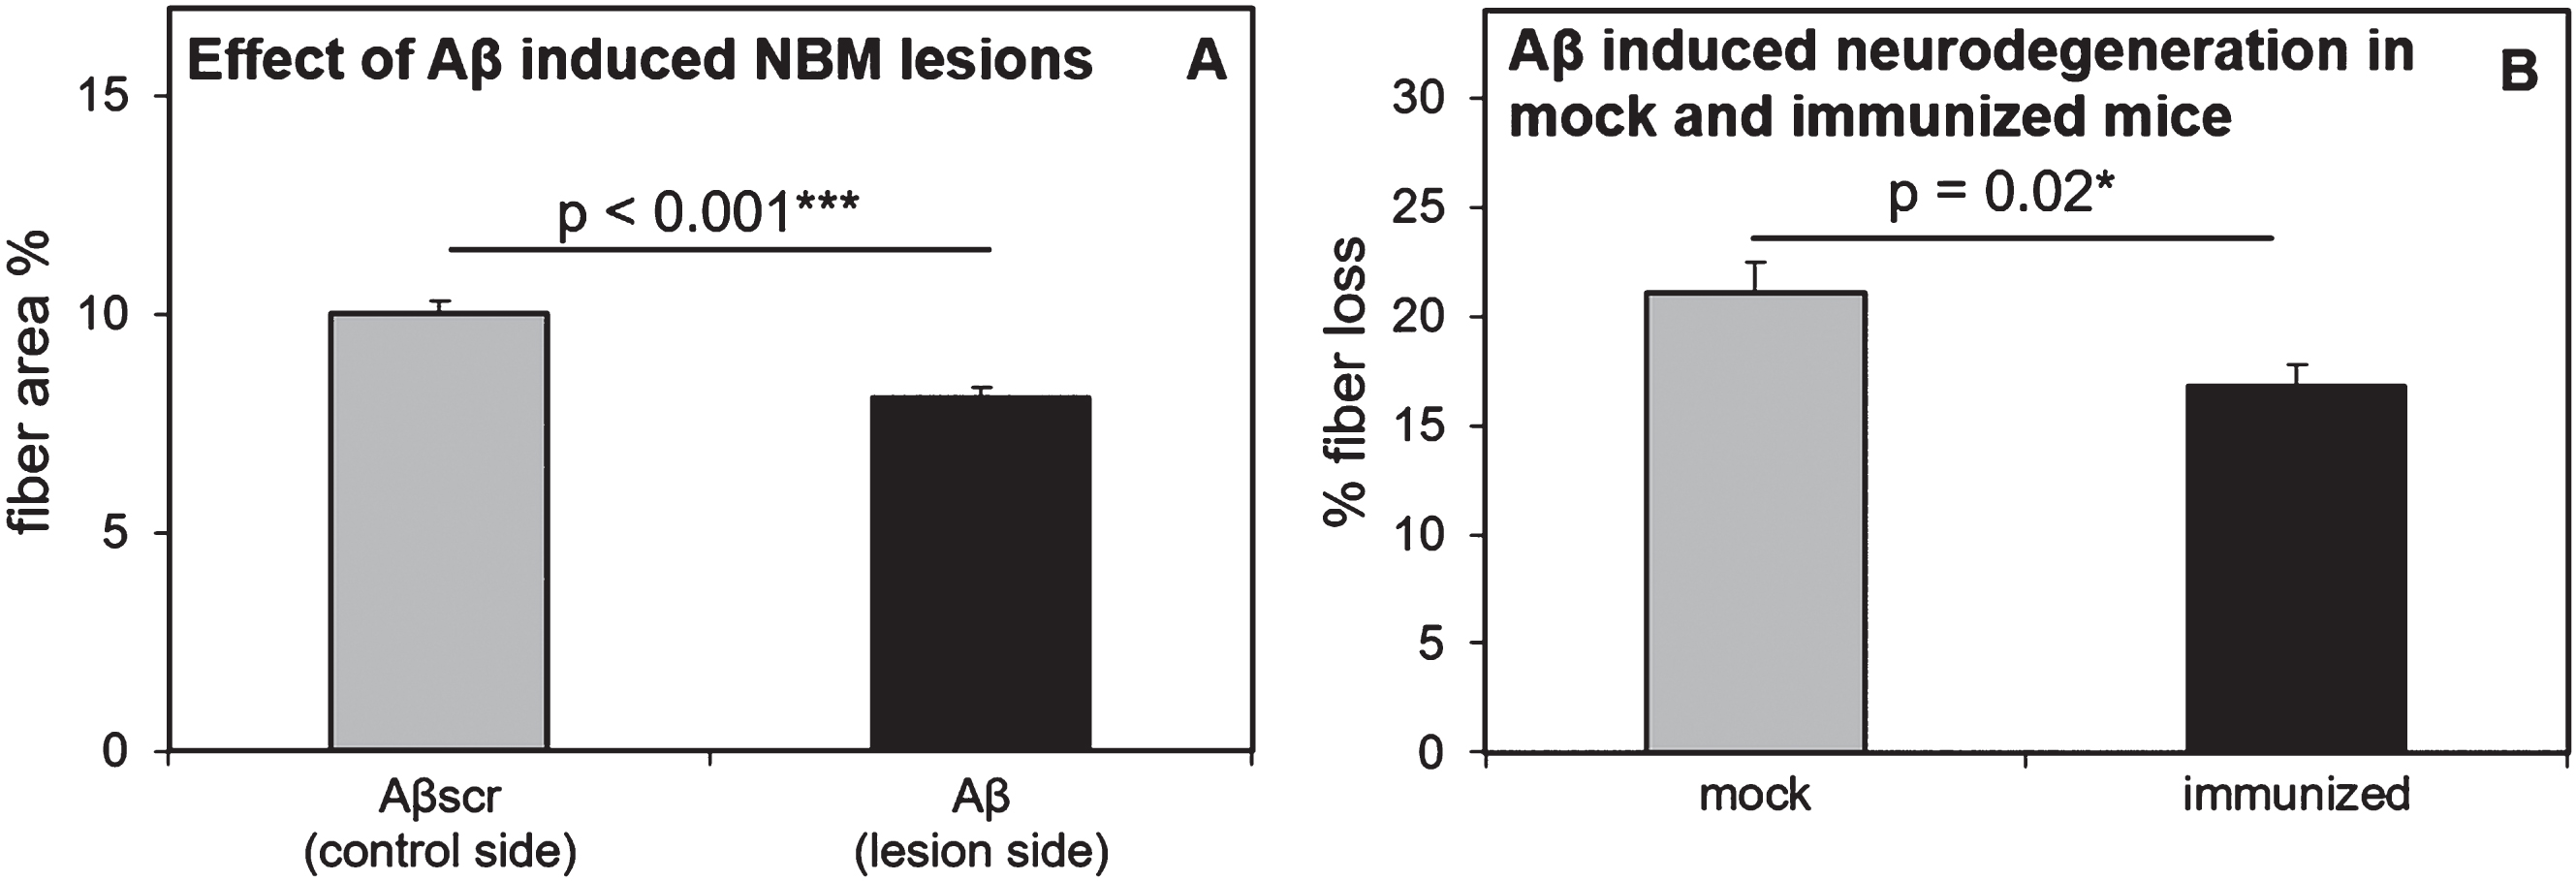 Effectiveness of the oligomeric Aβ1-42-induced NBM lesion model and effects in mock and immunized mice. All mice consistently showed less cortical cholinergic fiber density on the Aβ injected side of the brain, as compared to the scrambled-Aβ (Aβscr) injected control side of the brain (A). Compared to mock mice, immunized mice showed significantly reduced cholinergic fiber loss in the cortex, as measured by optical fiber density after ChAT immunostaining (B). In both panels the error bars represent SEM.